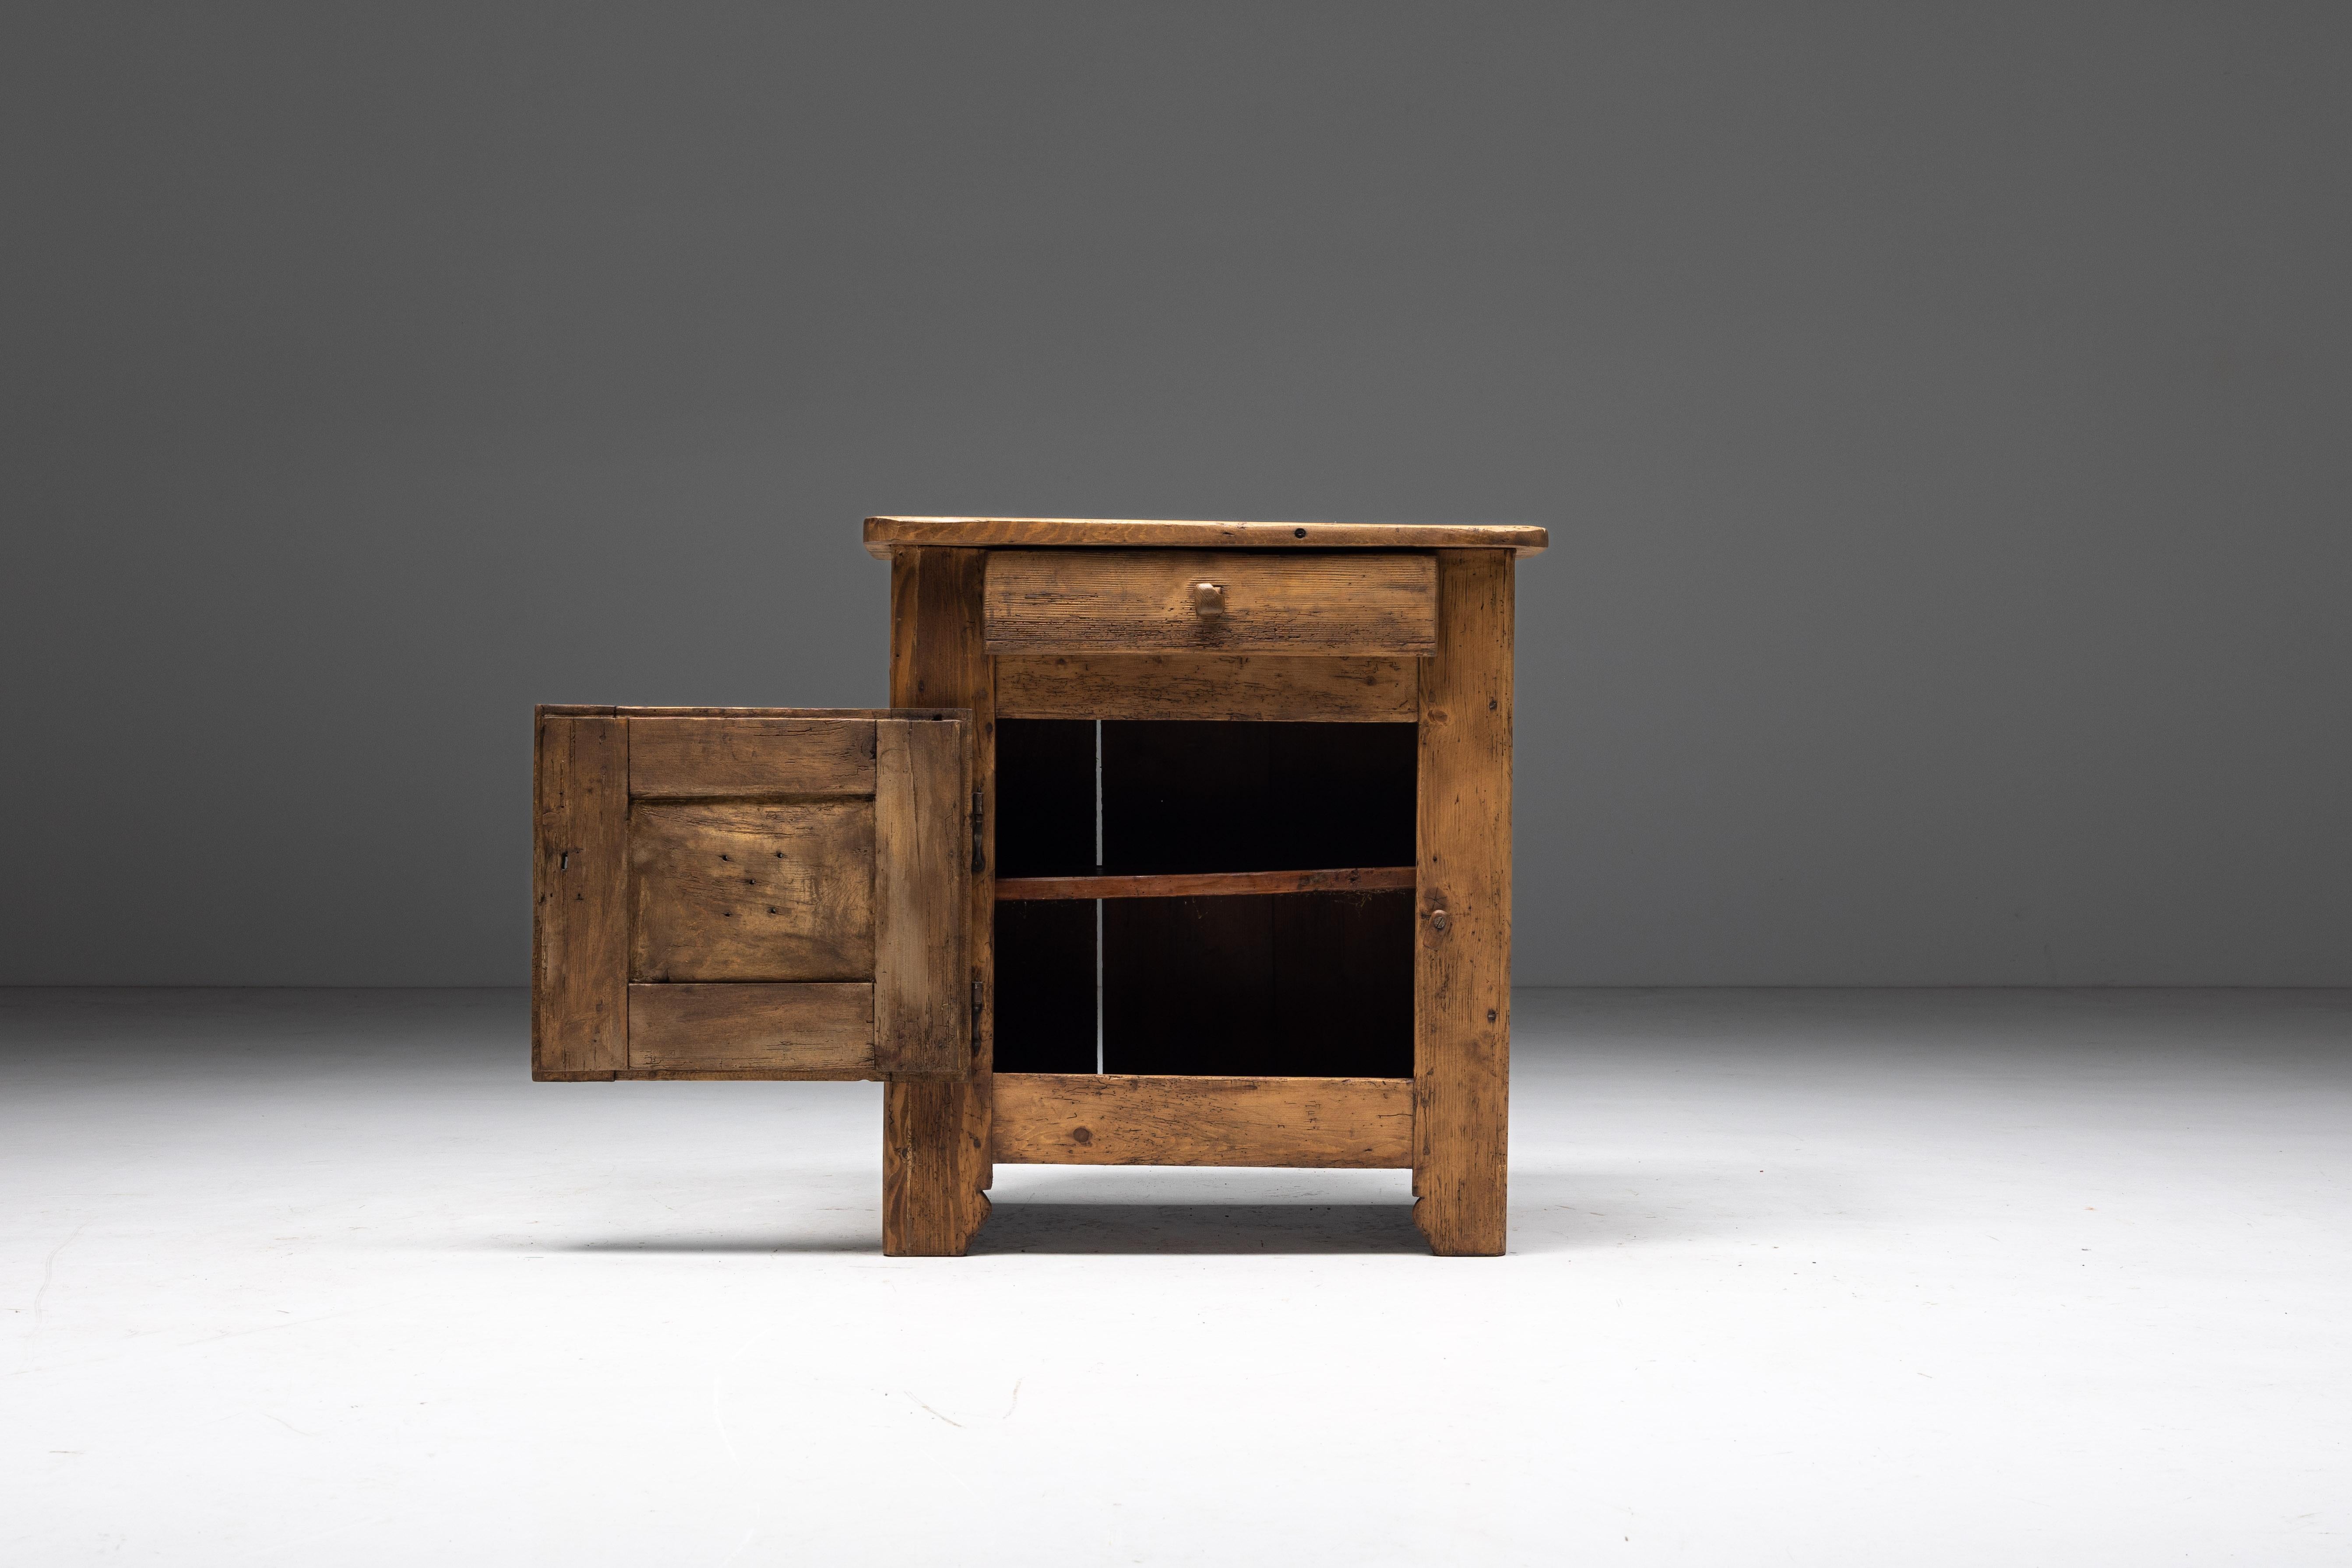 Monoxylite; Rustic; Sideboard; Buffet; Dressoir; Cabinet; Auvergne; France; Folk Art; 19th Century; Writing Desk; 

19th-century folk art cabinet from France, handcrafted from solid wood. This piece embodies rustic allure and cultural heritage, with